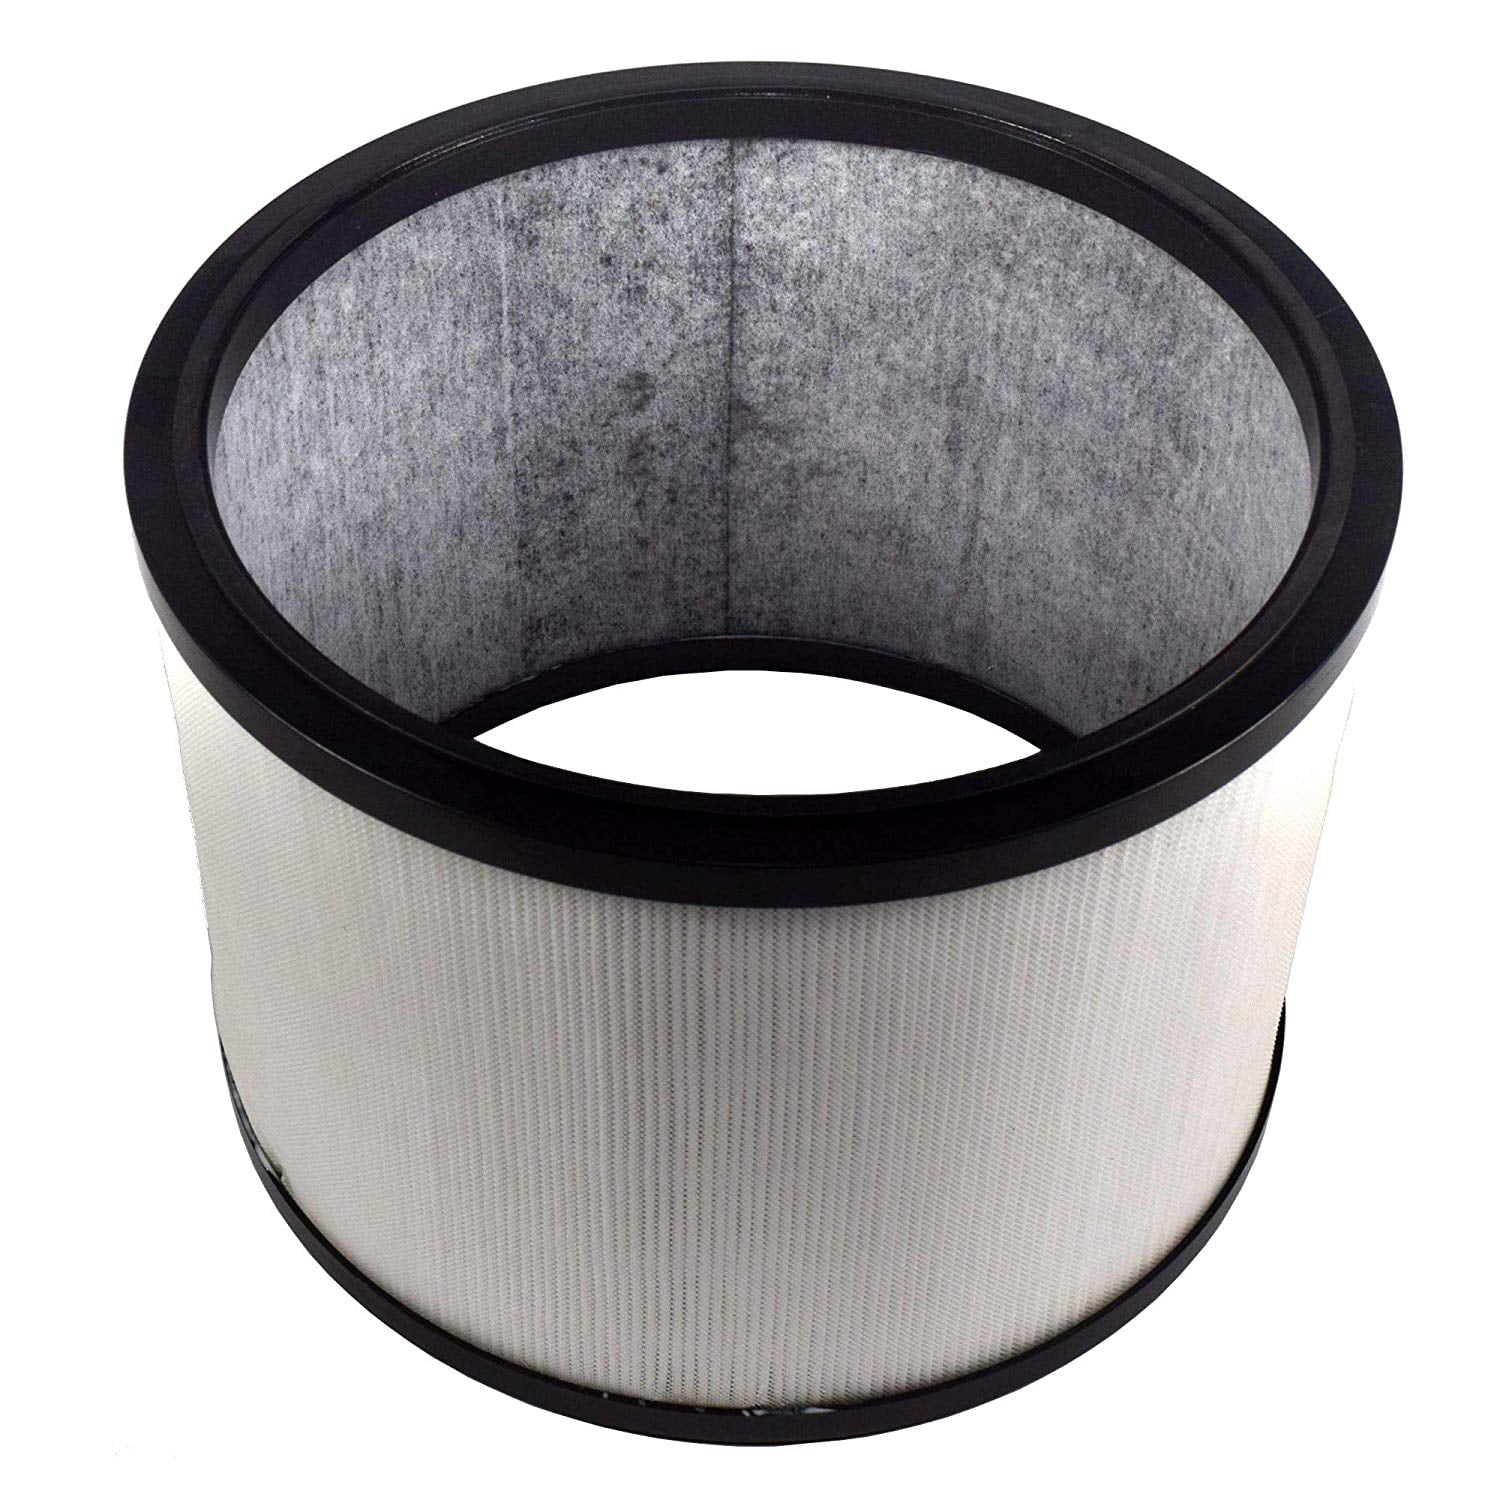 HQRP Air Purifier Filter for Dyson Pure Cool Link Desk Air Purifiers 